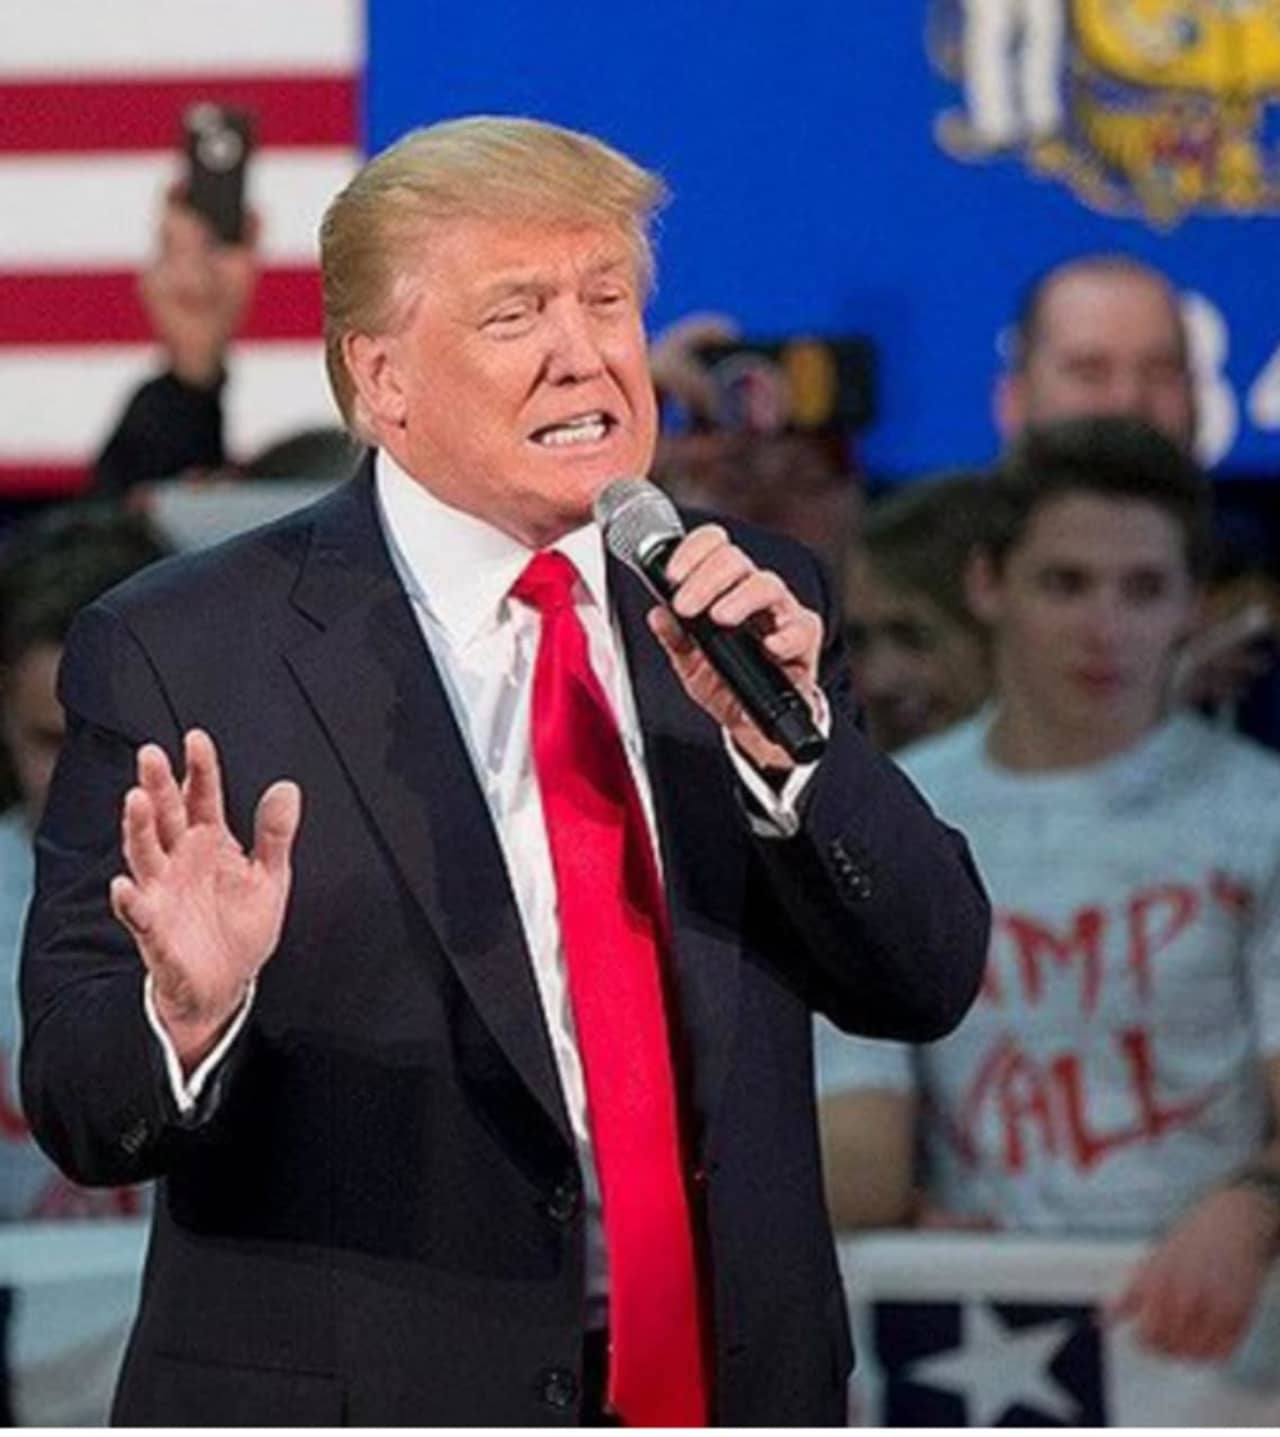 Ticket requests are now being accepted for Donald Trump's Sunday rally in Poughkeepsie.